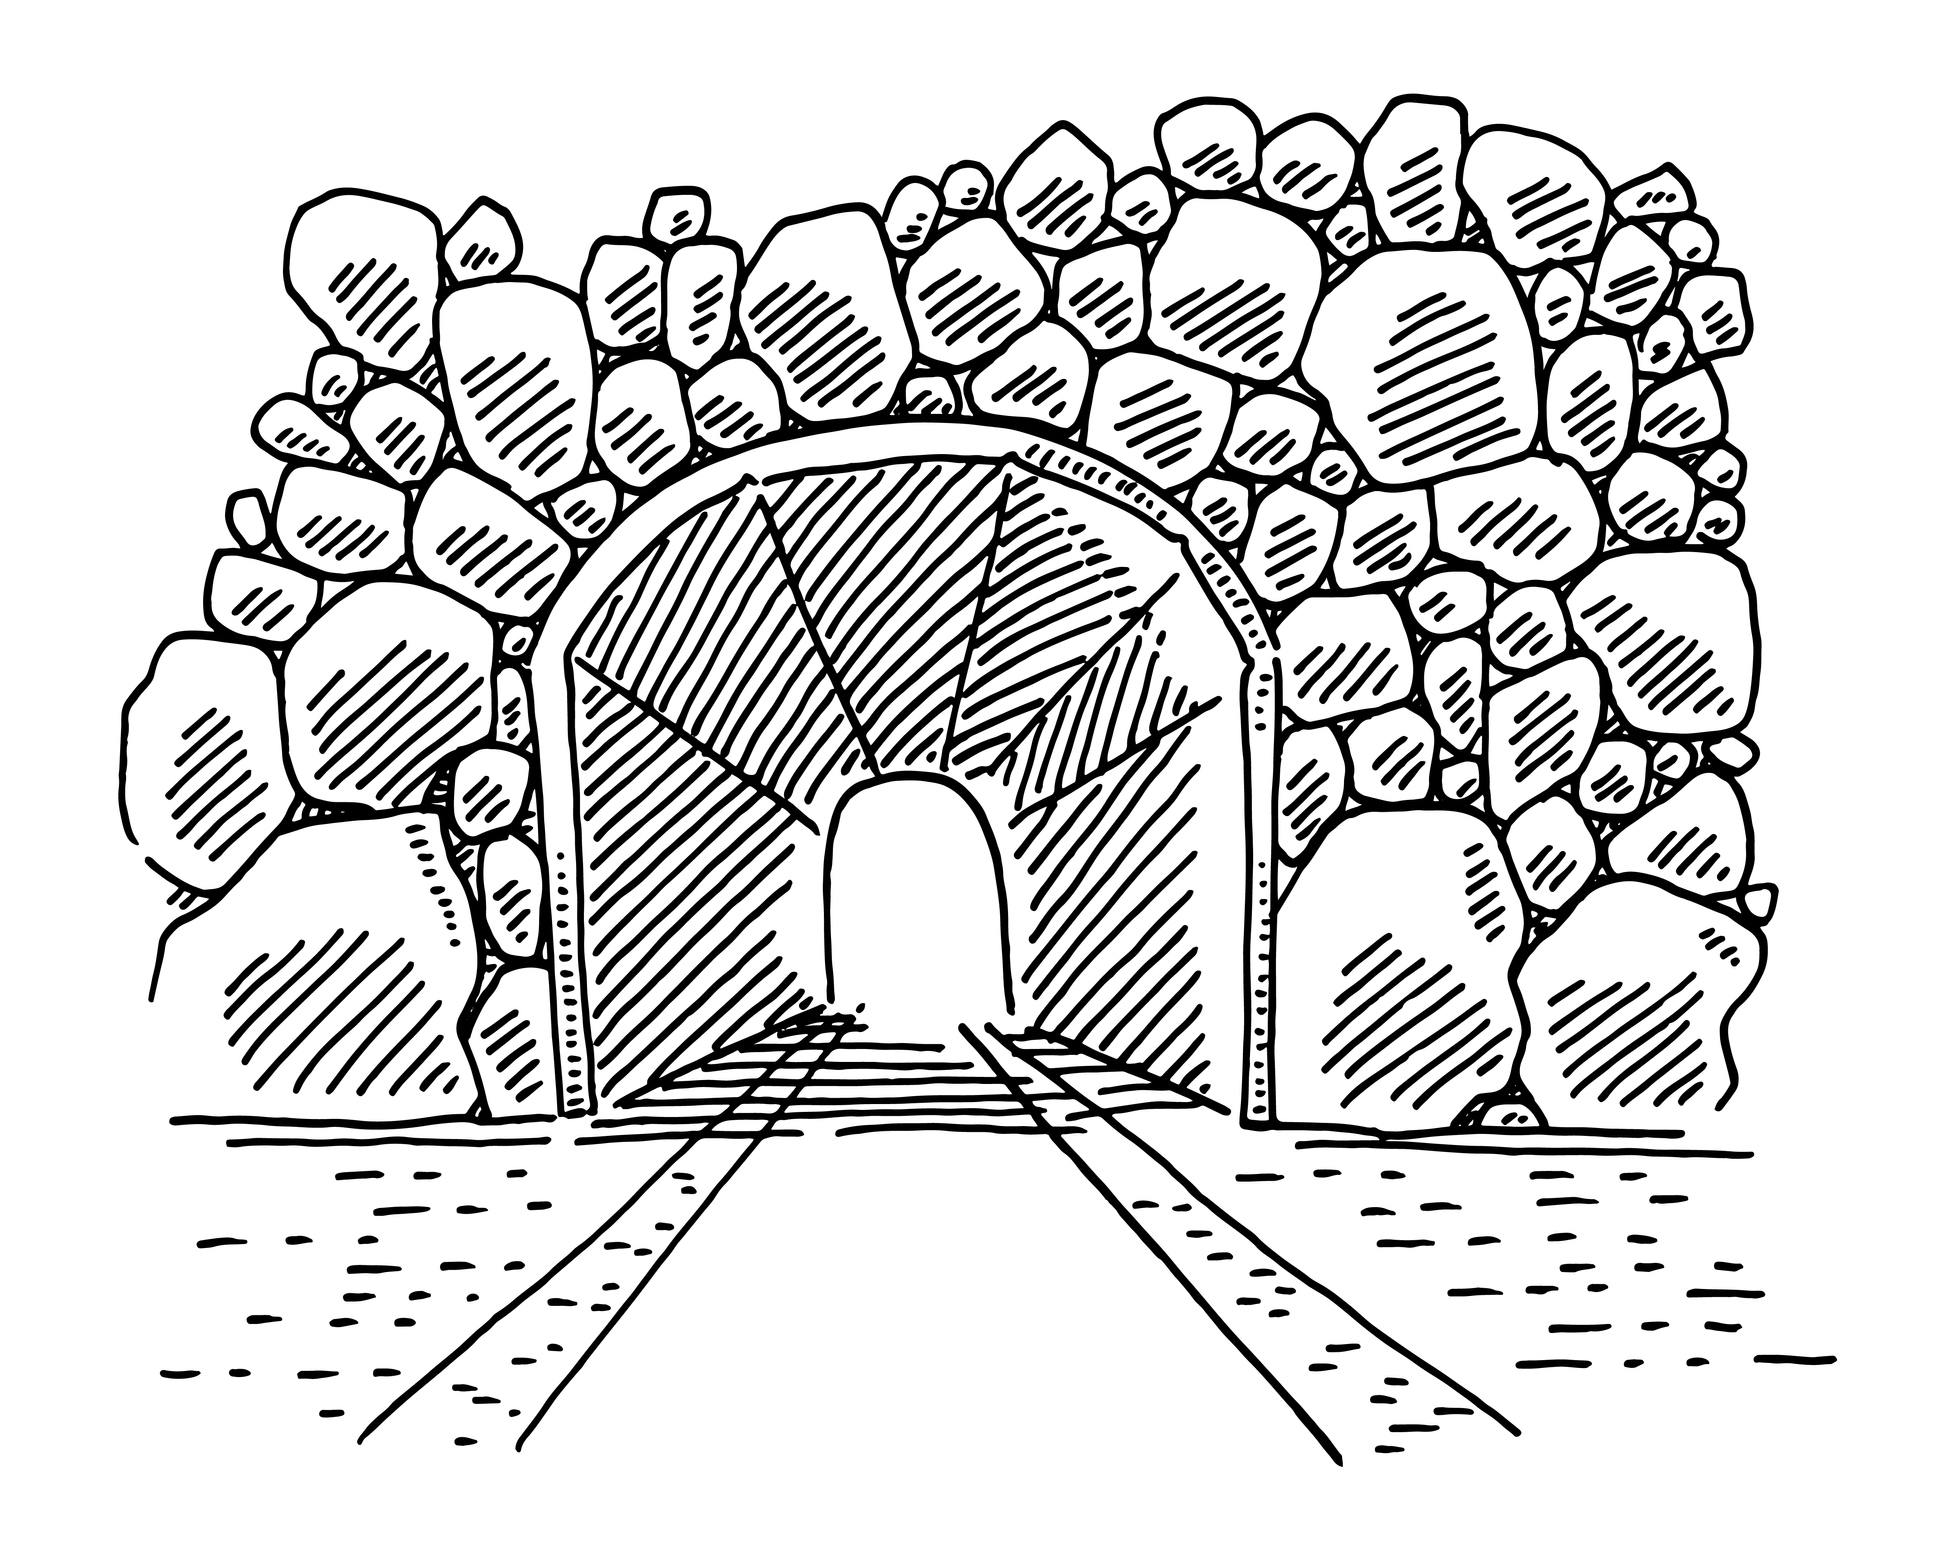 Illustration of a tunnel